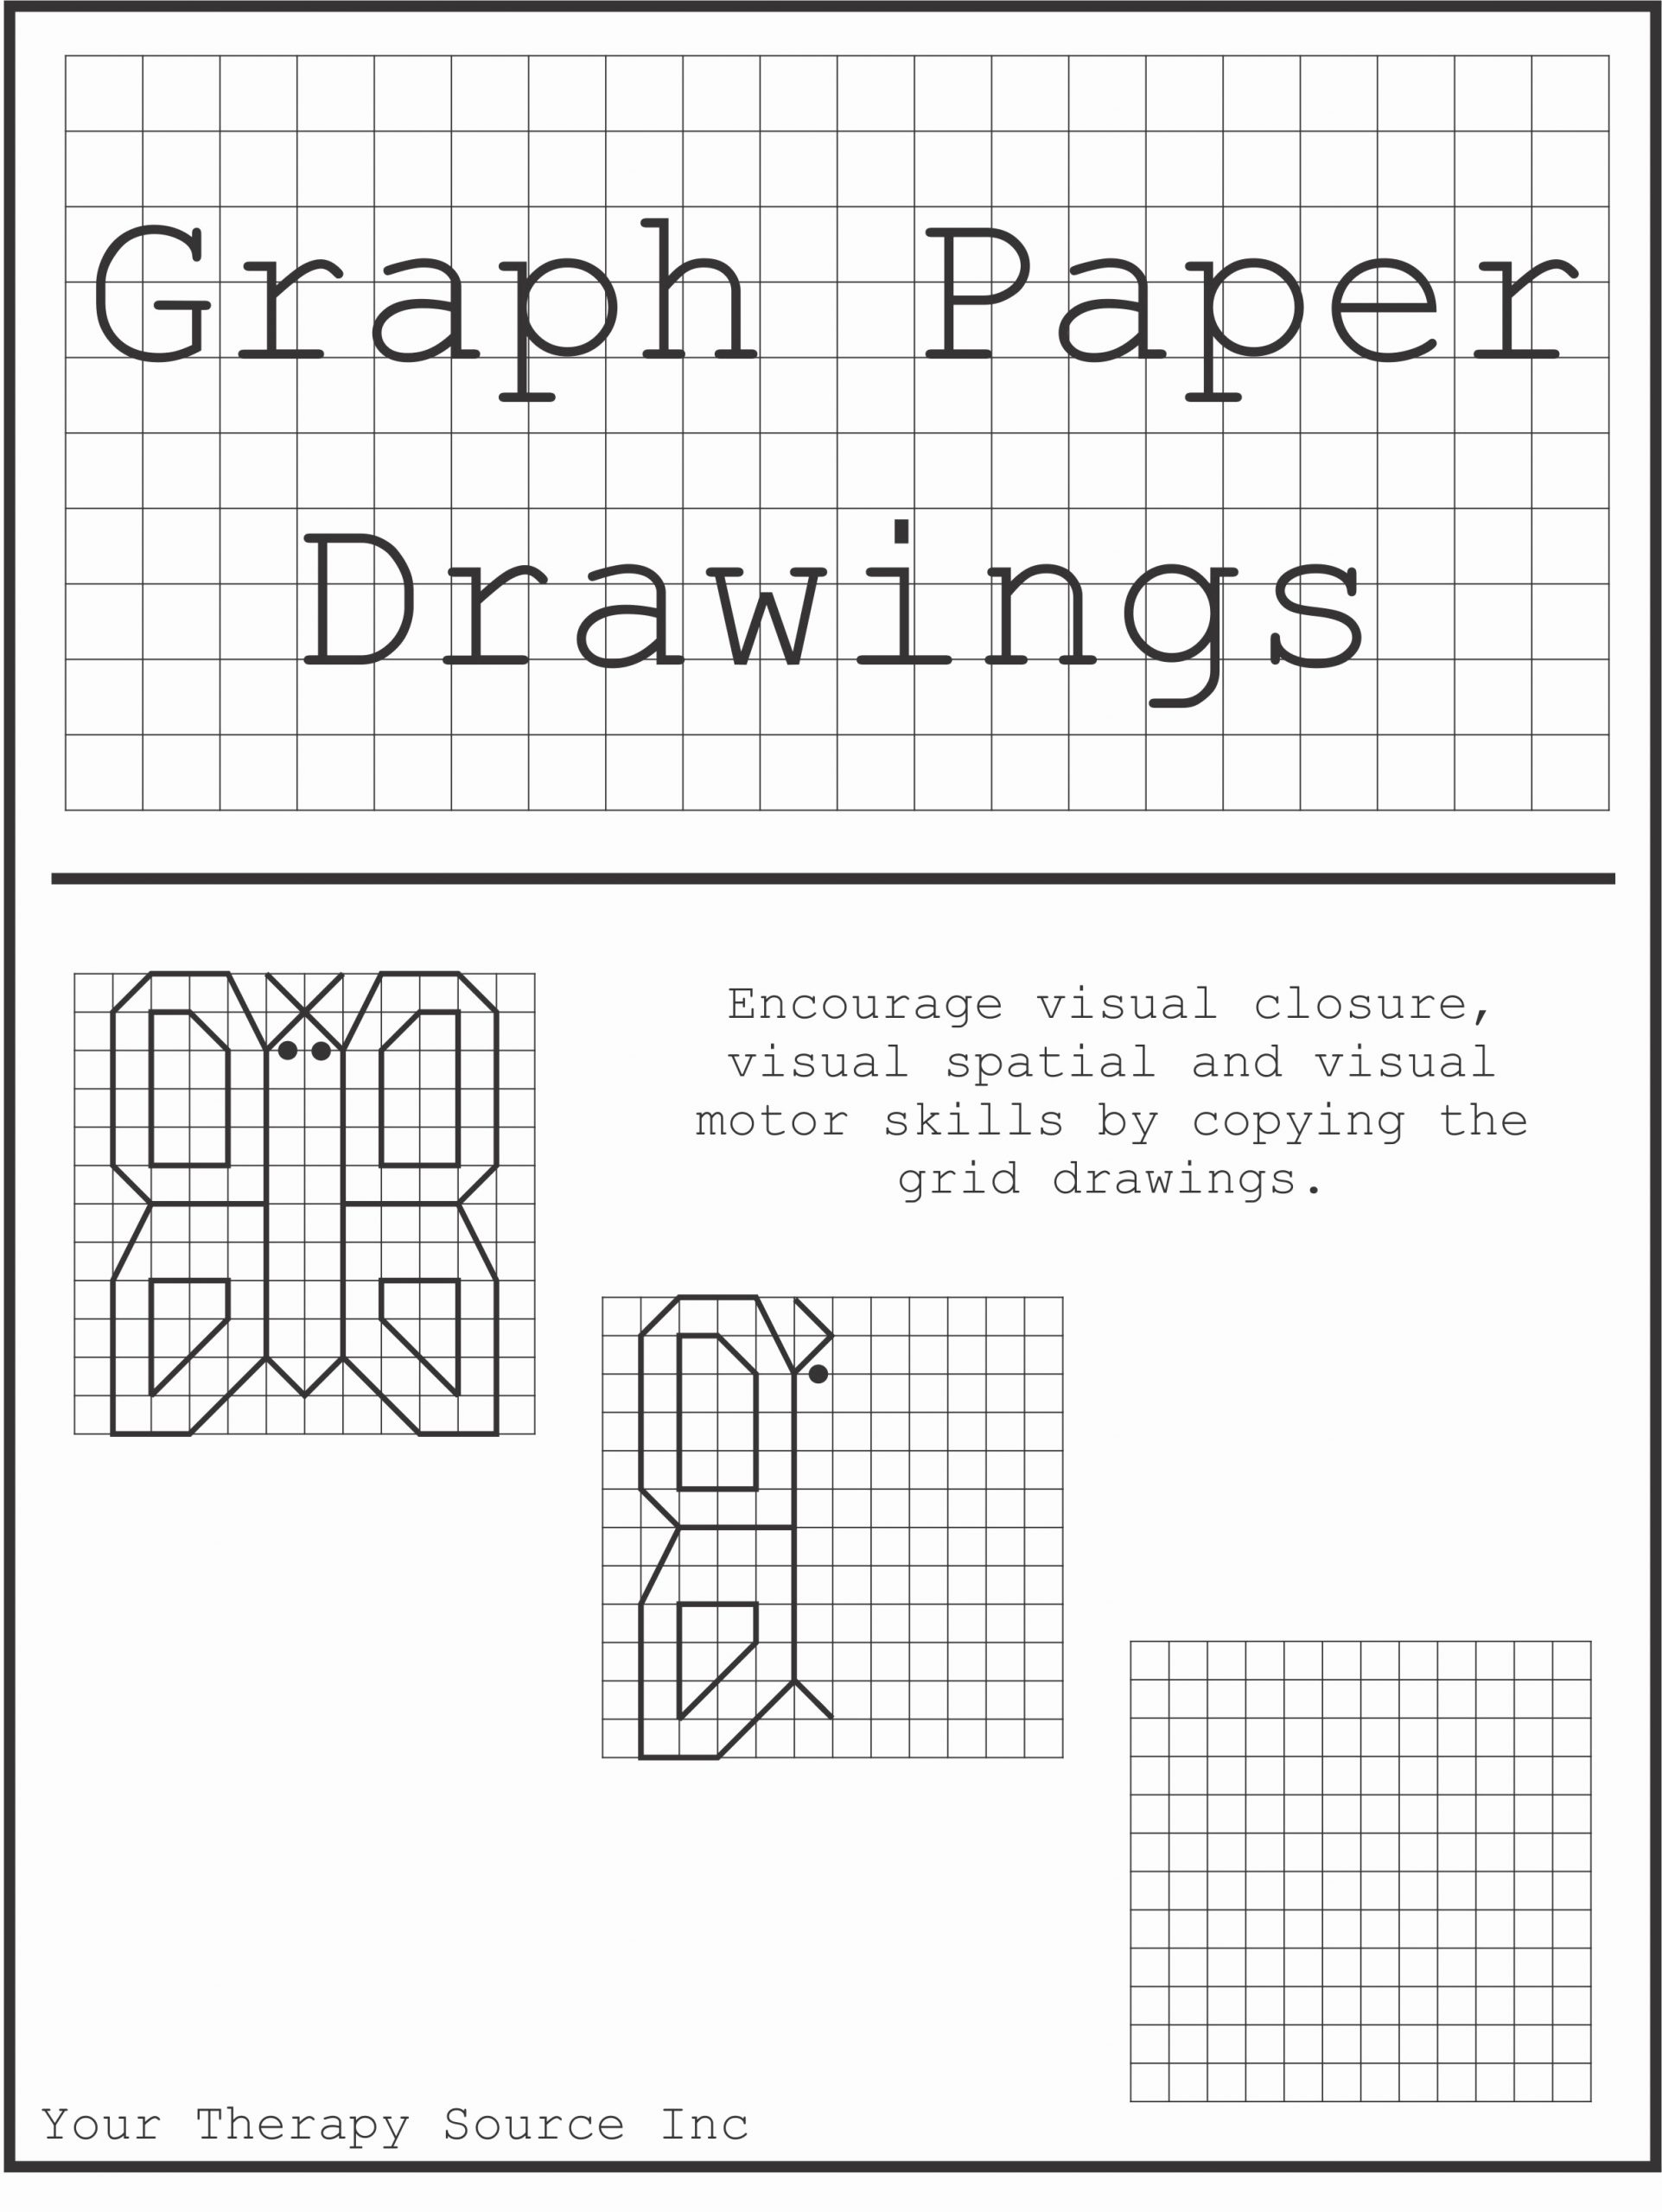 Graph Paper Art Worksheets Awesome Graph Paper Drawings